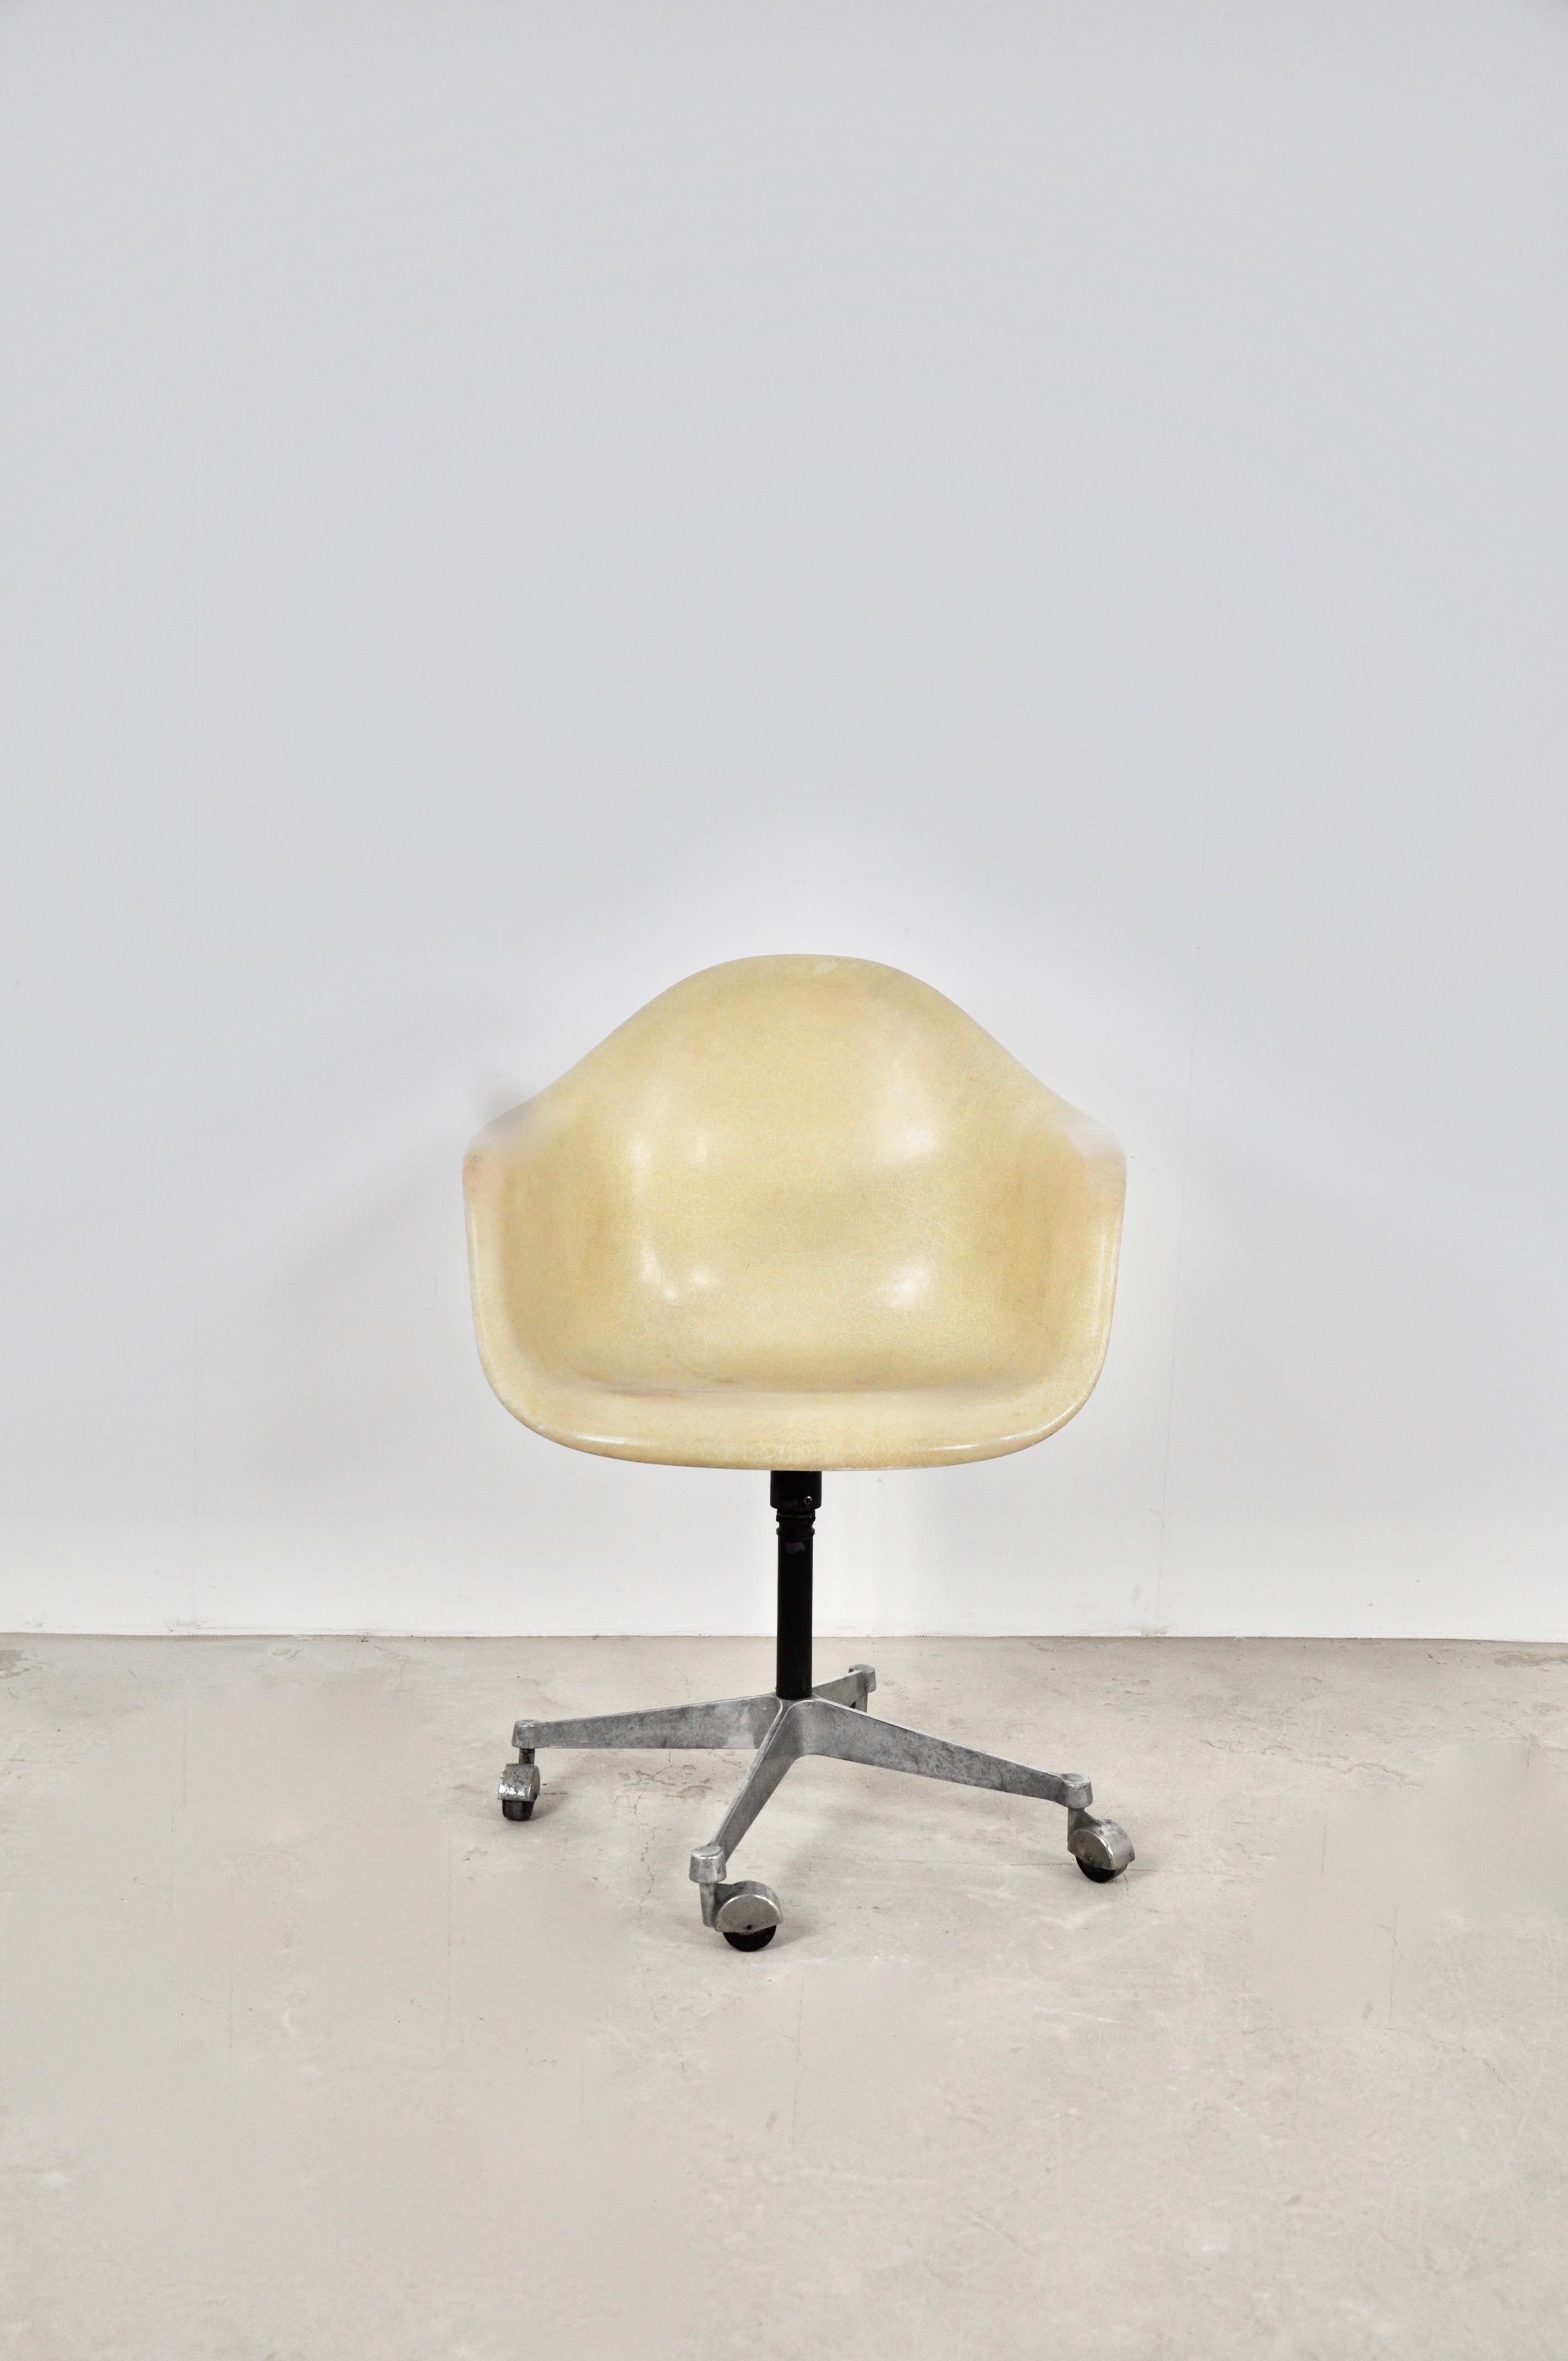 Swivel chair on casters in metal and fiberglass. Wear due to time and age of the chair (see photo) 
Adjustable seat height.